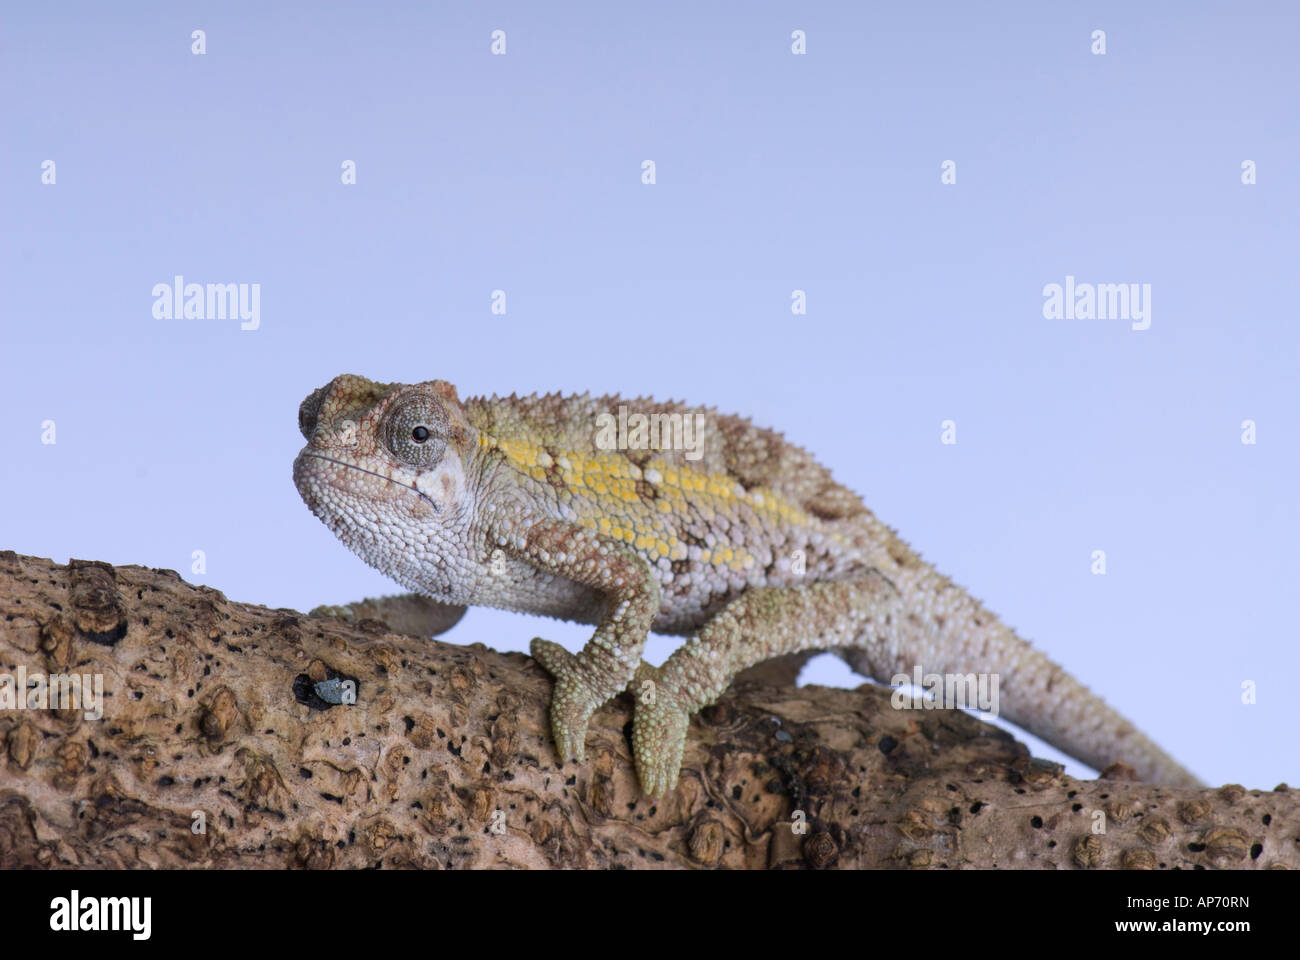 Young chameleon with diamond pettern on tree brancch Stock Photo